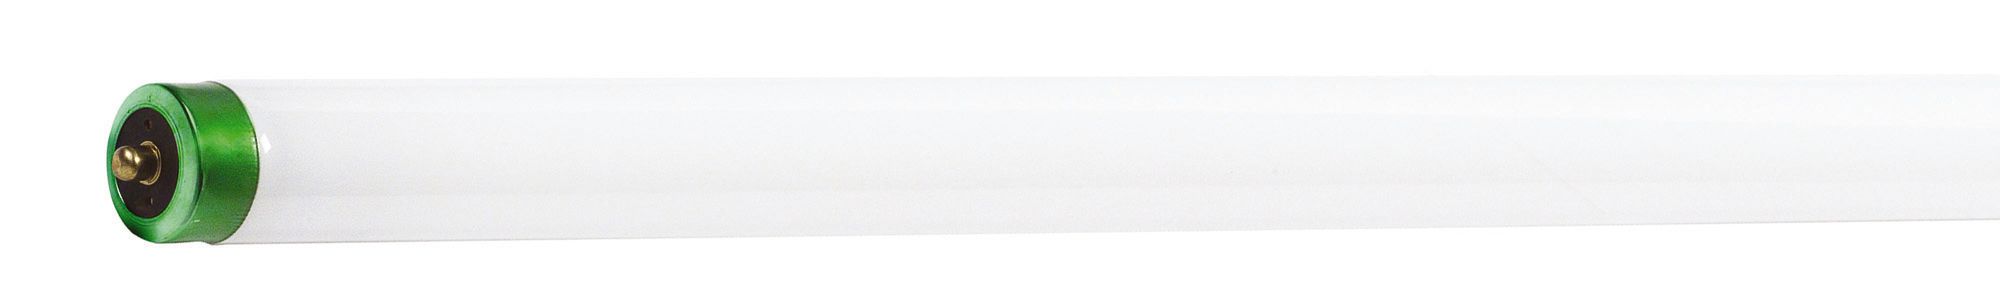 236869 (F96T8/TL850/PLUS/ALTO) Linear Fluorescent Lamp Philips Lighting;Signify Lamps